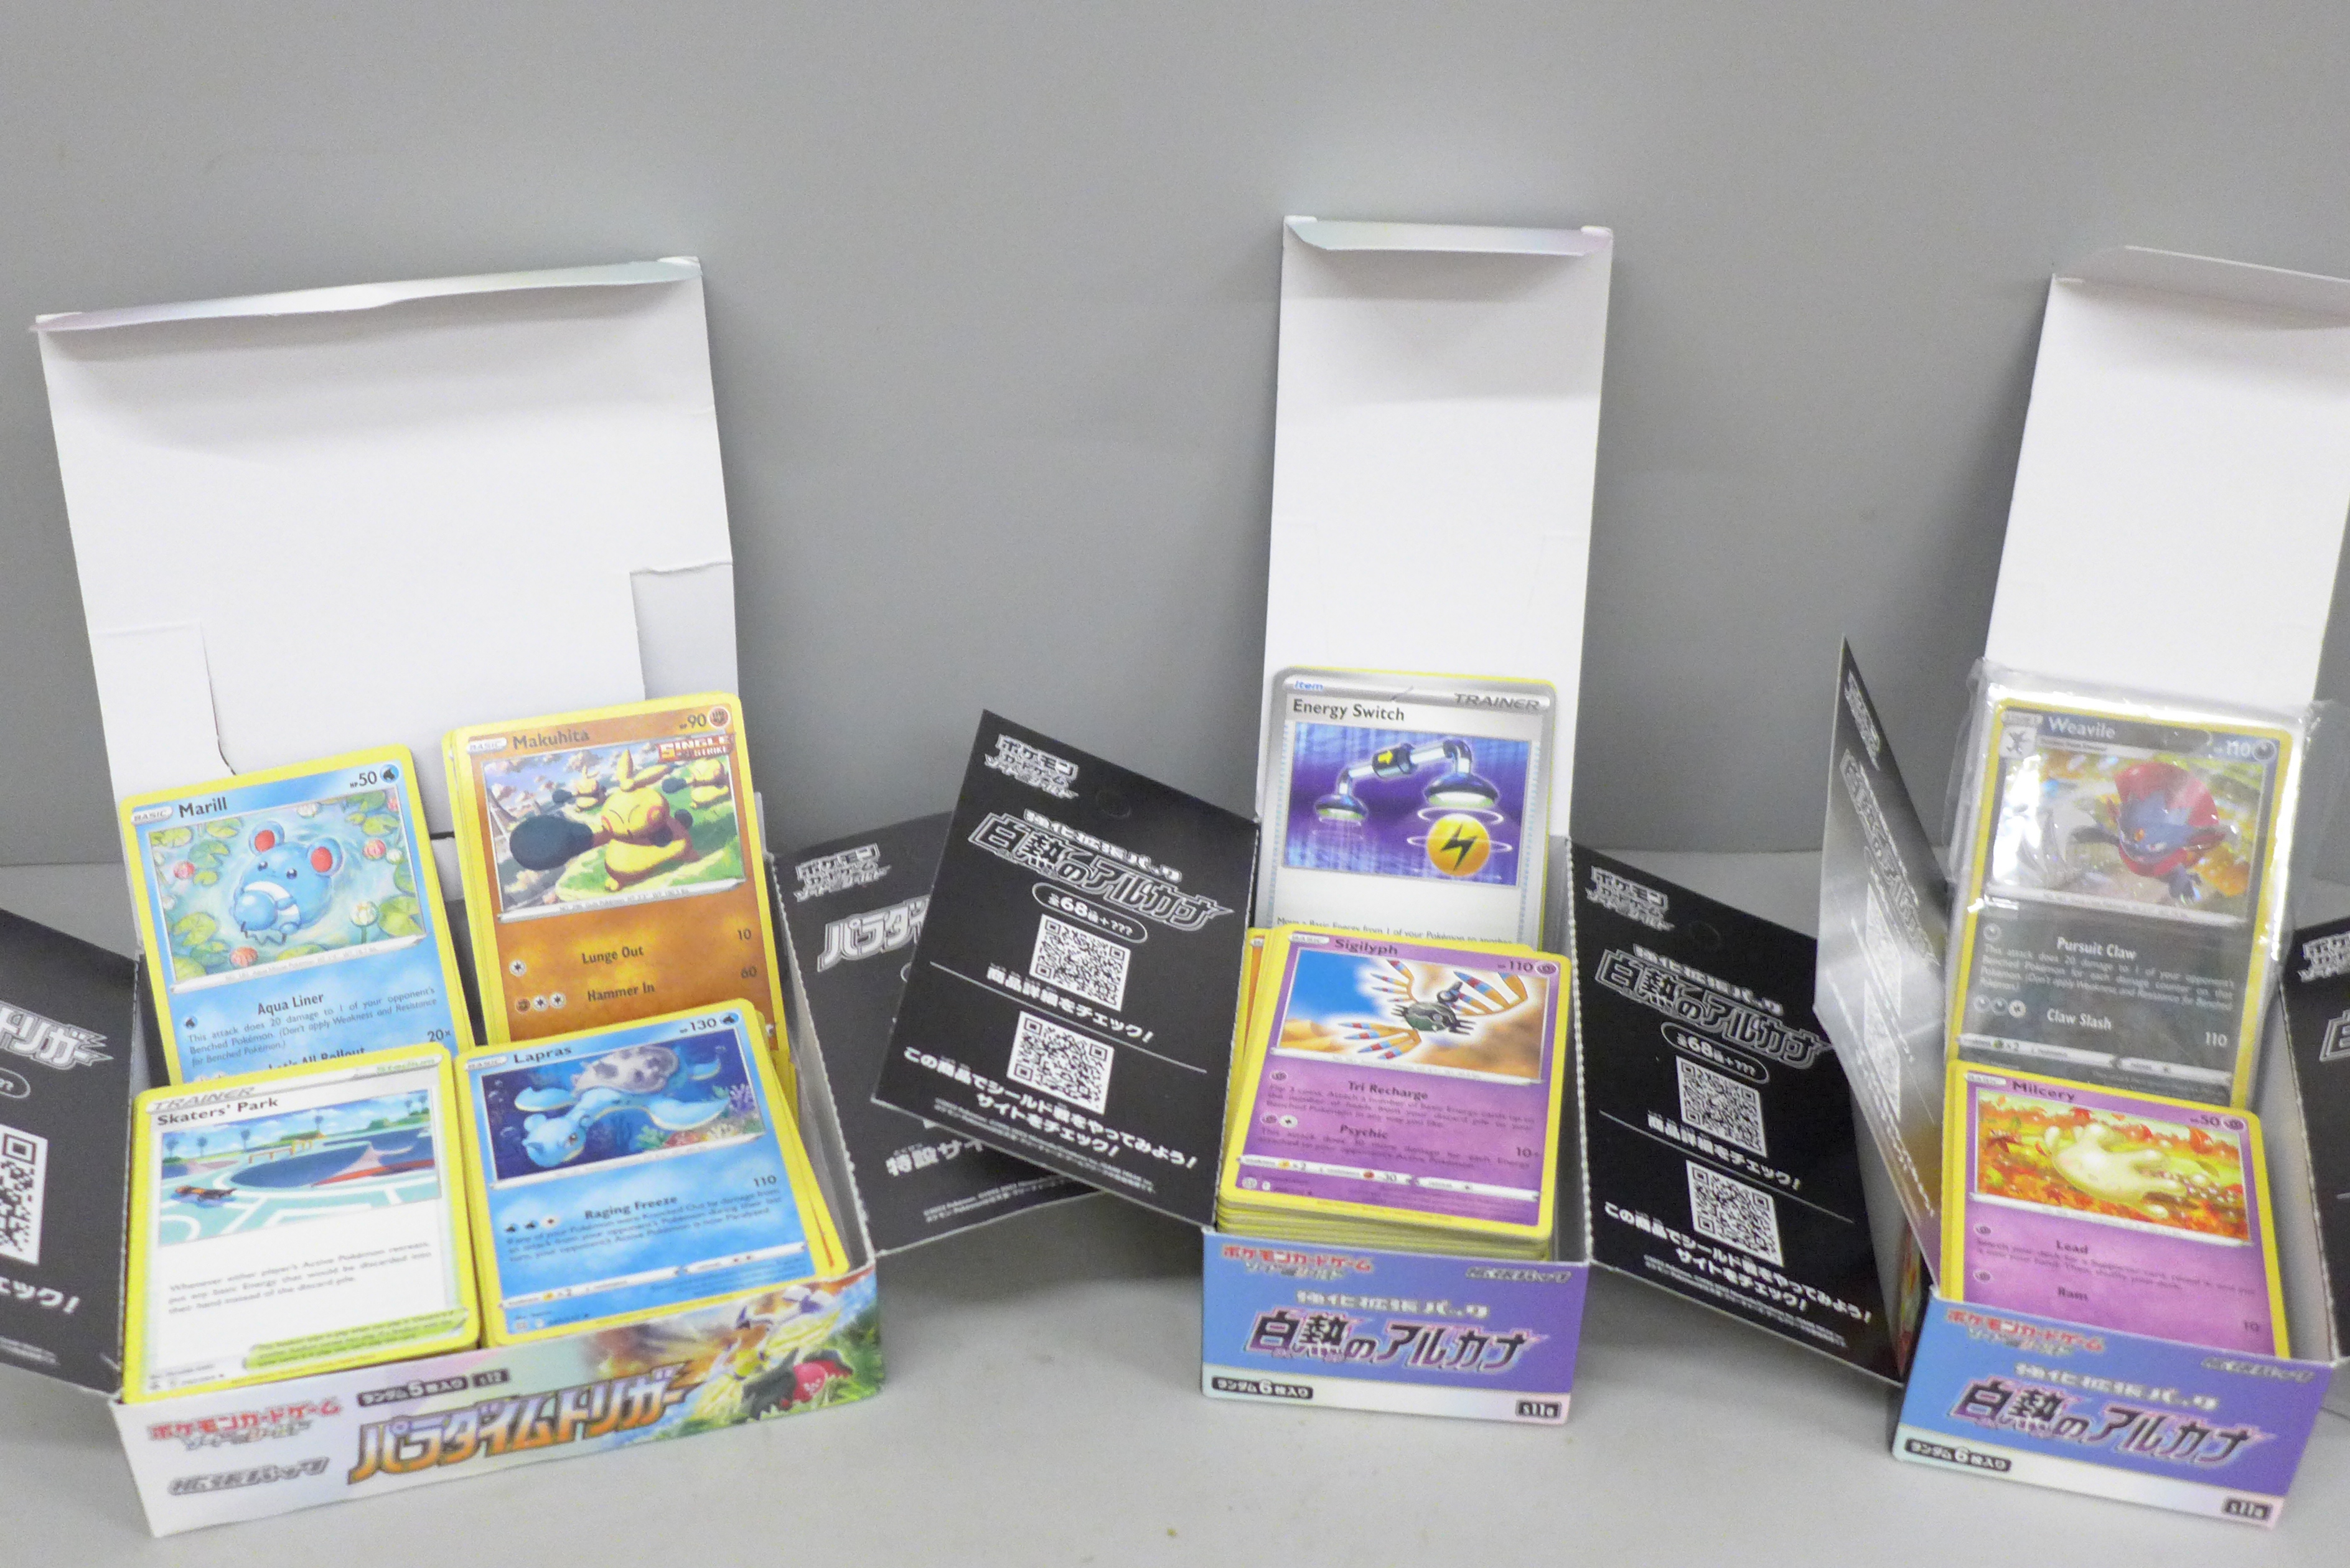 500 x Pokemon cards, including, 30 holographic cards, various sets in collectors boxes